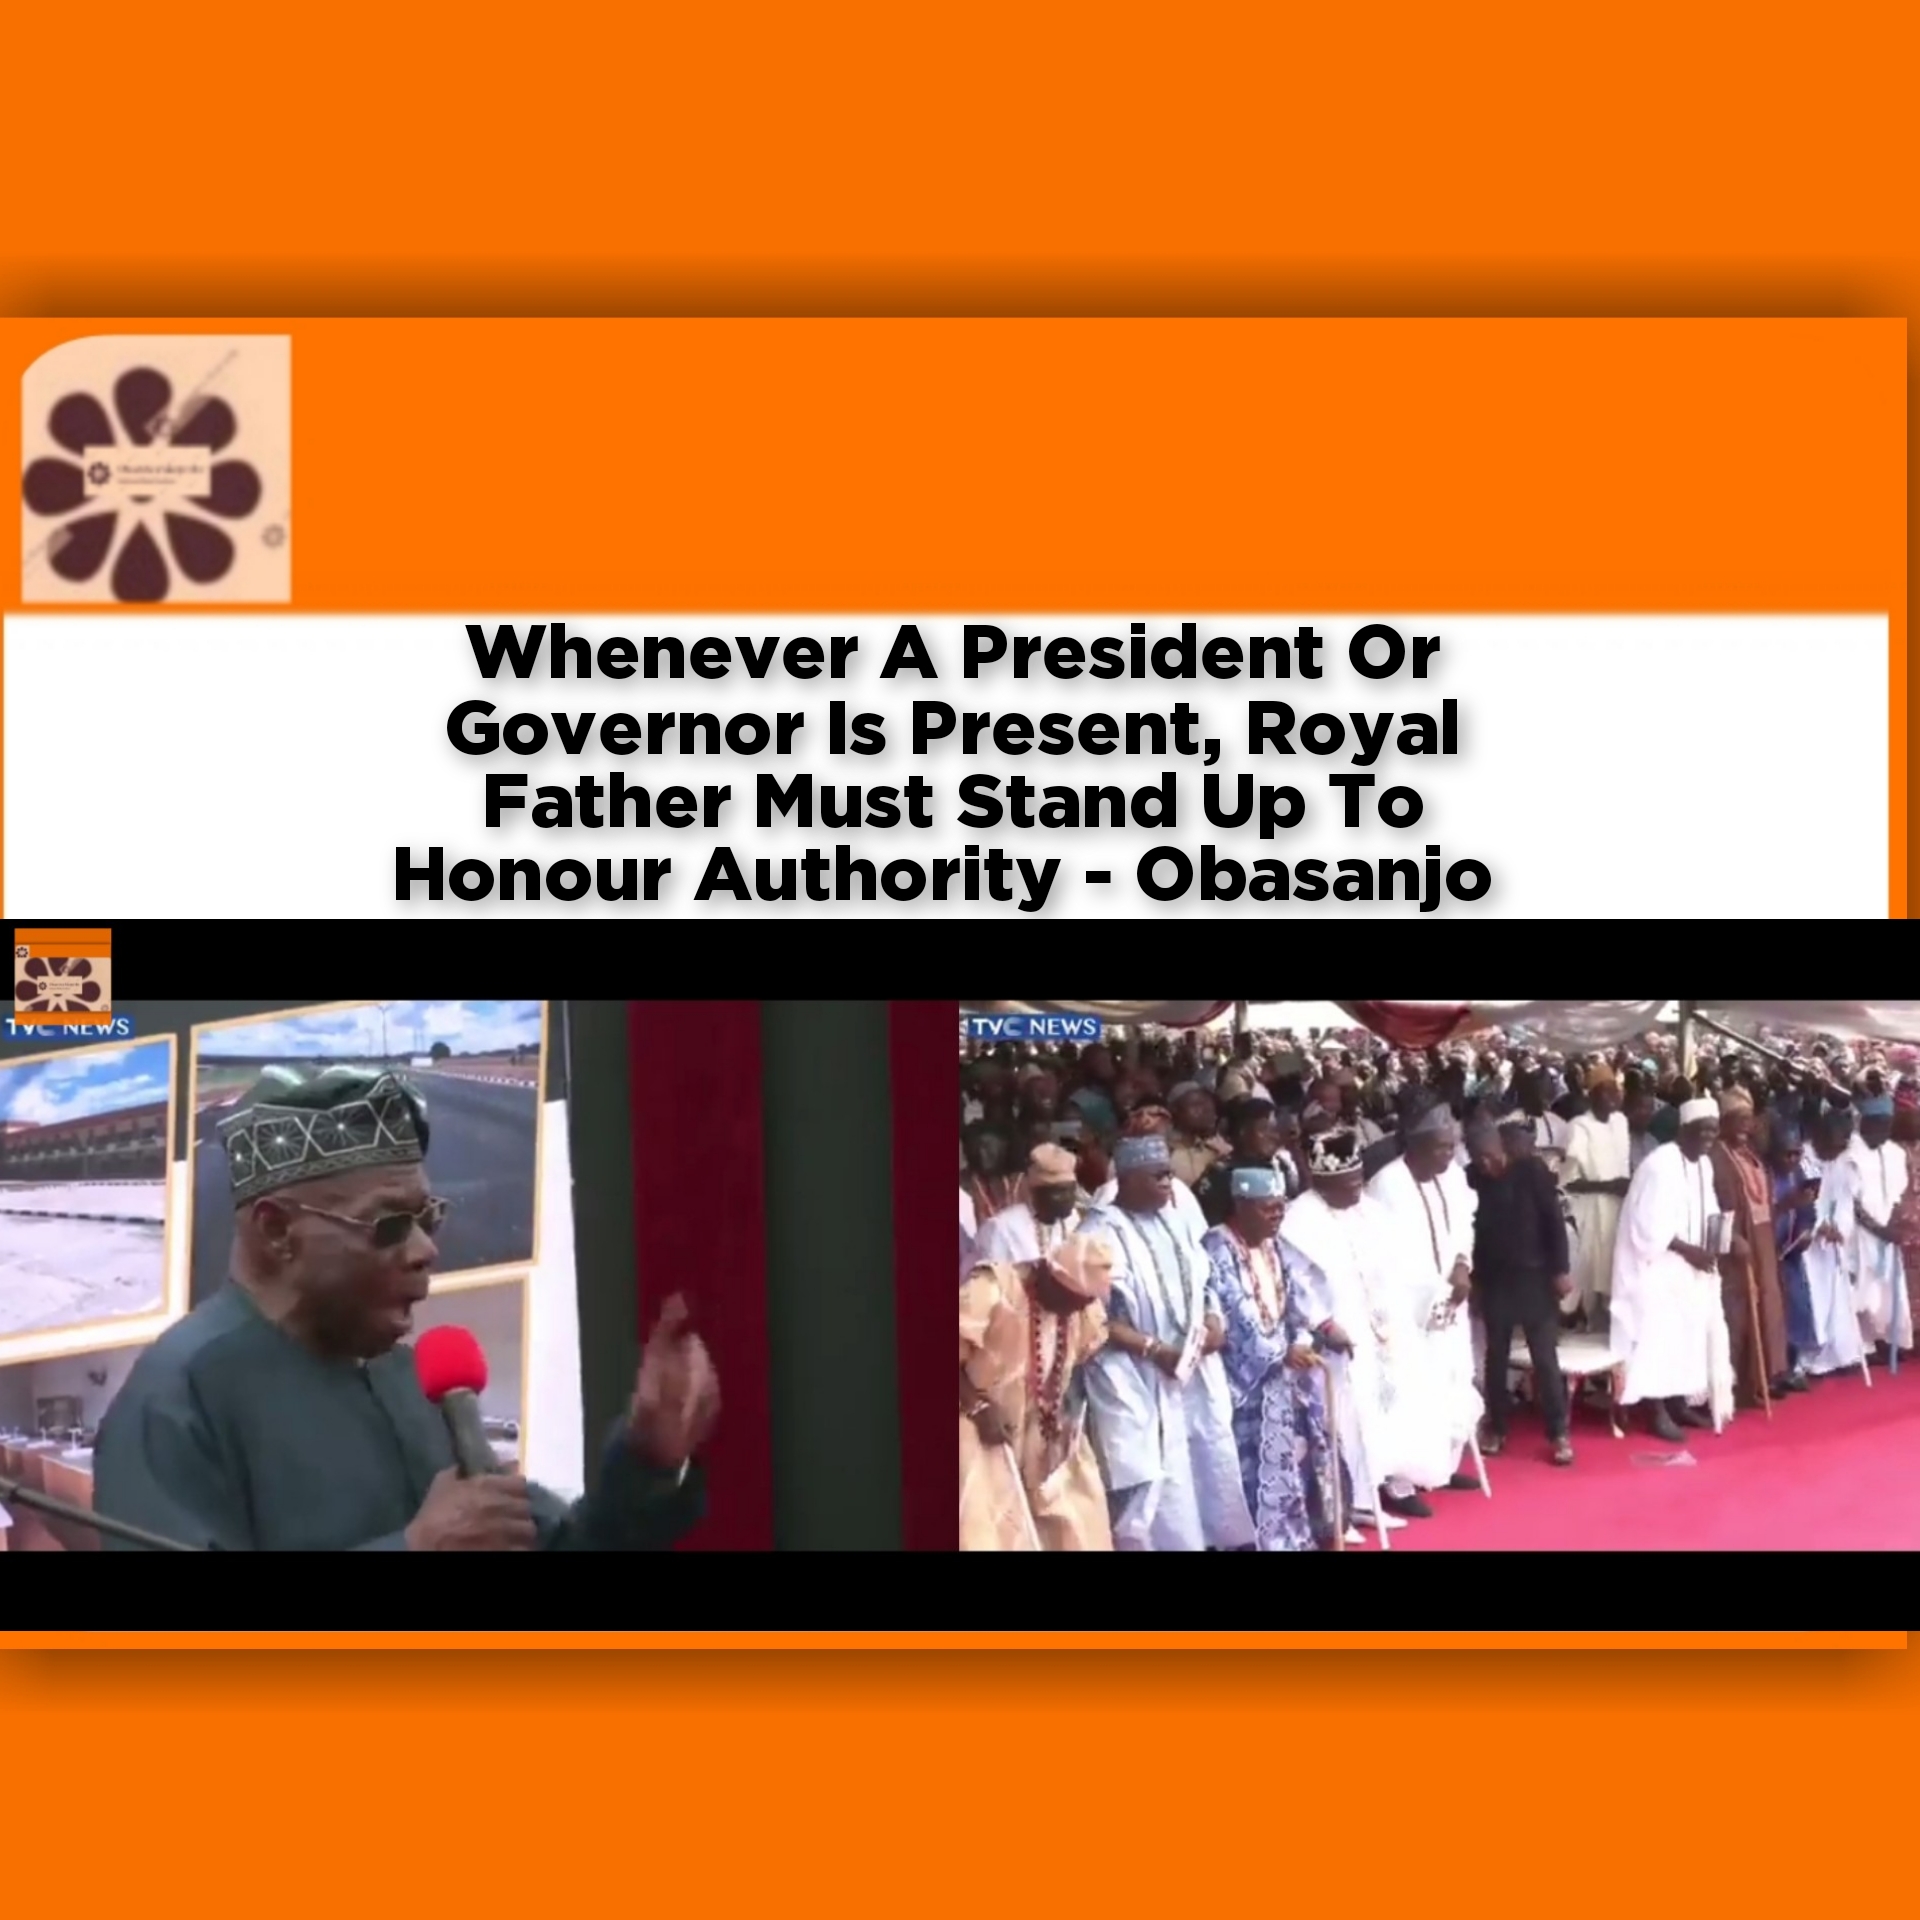 Whenever A President Or Governor Is Present, Royal Father Must Stand Up To Honour Authority - Obasanjo ~ OsazuwaAkonedo #edo